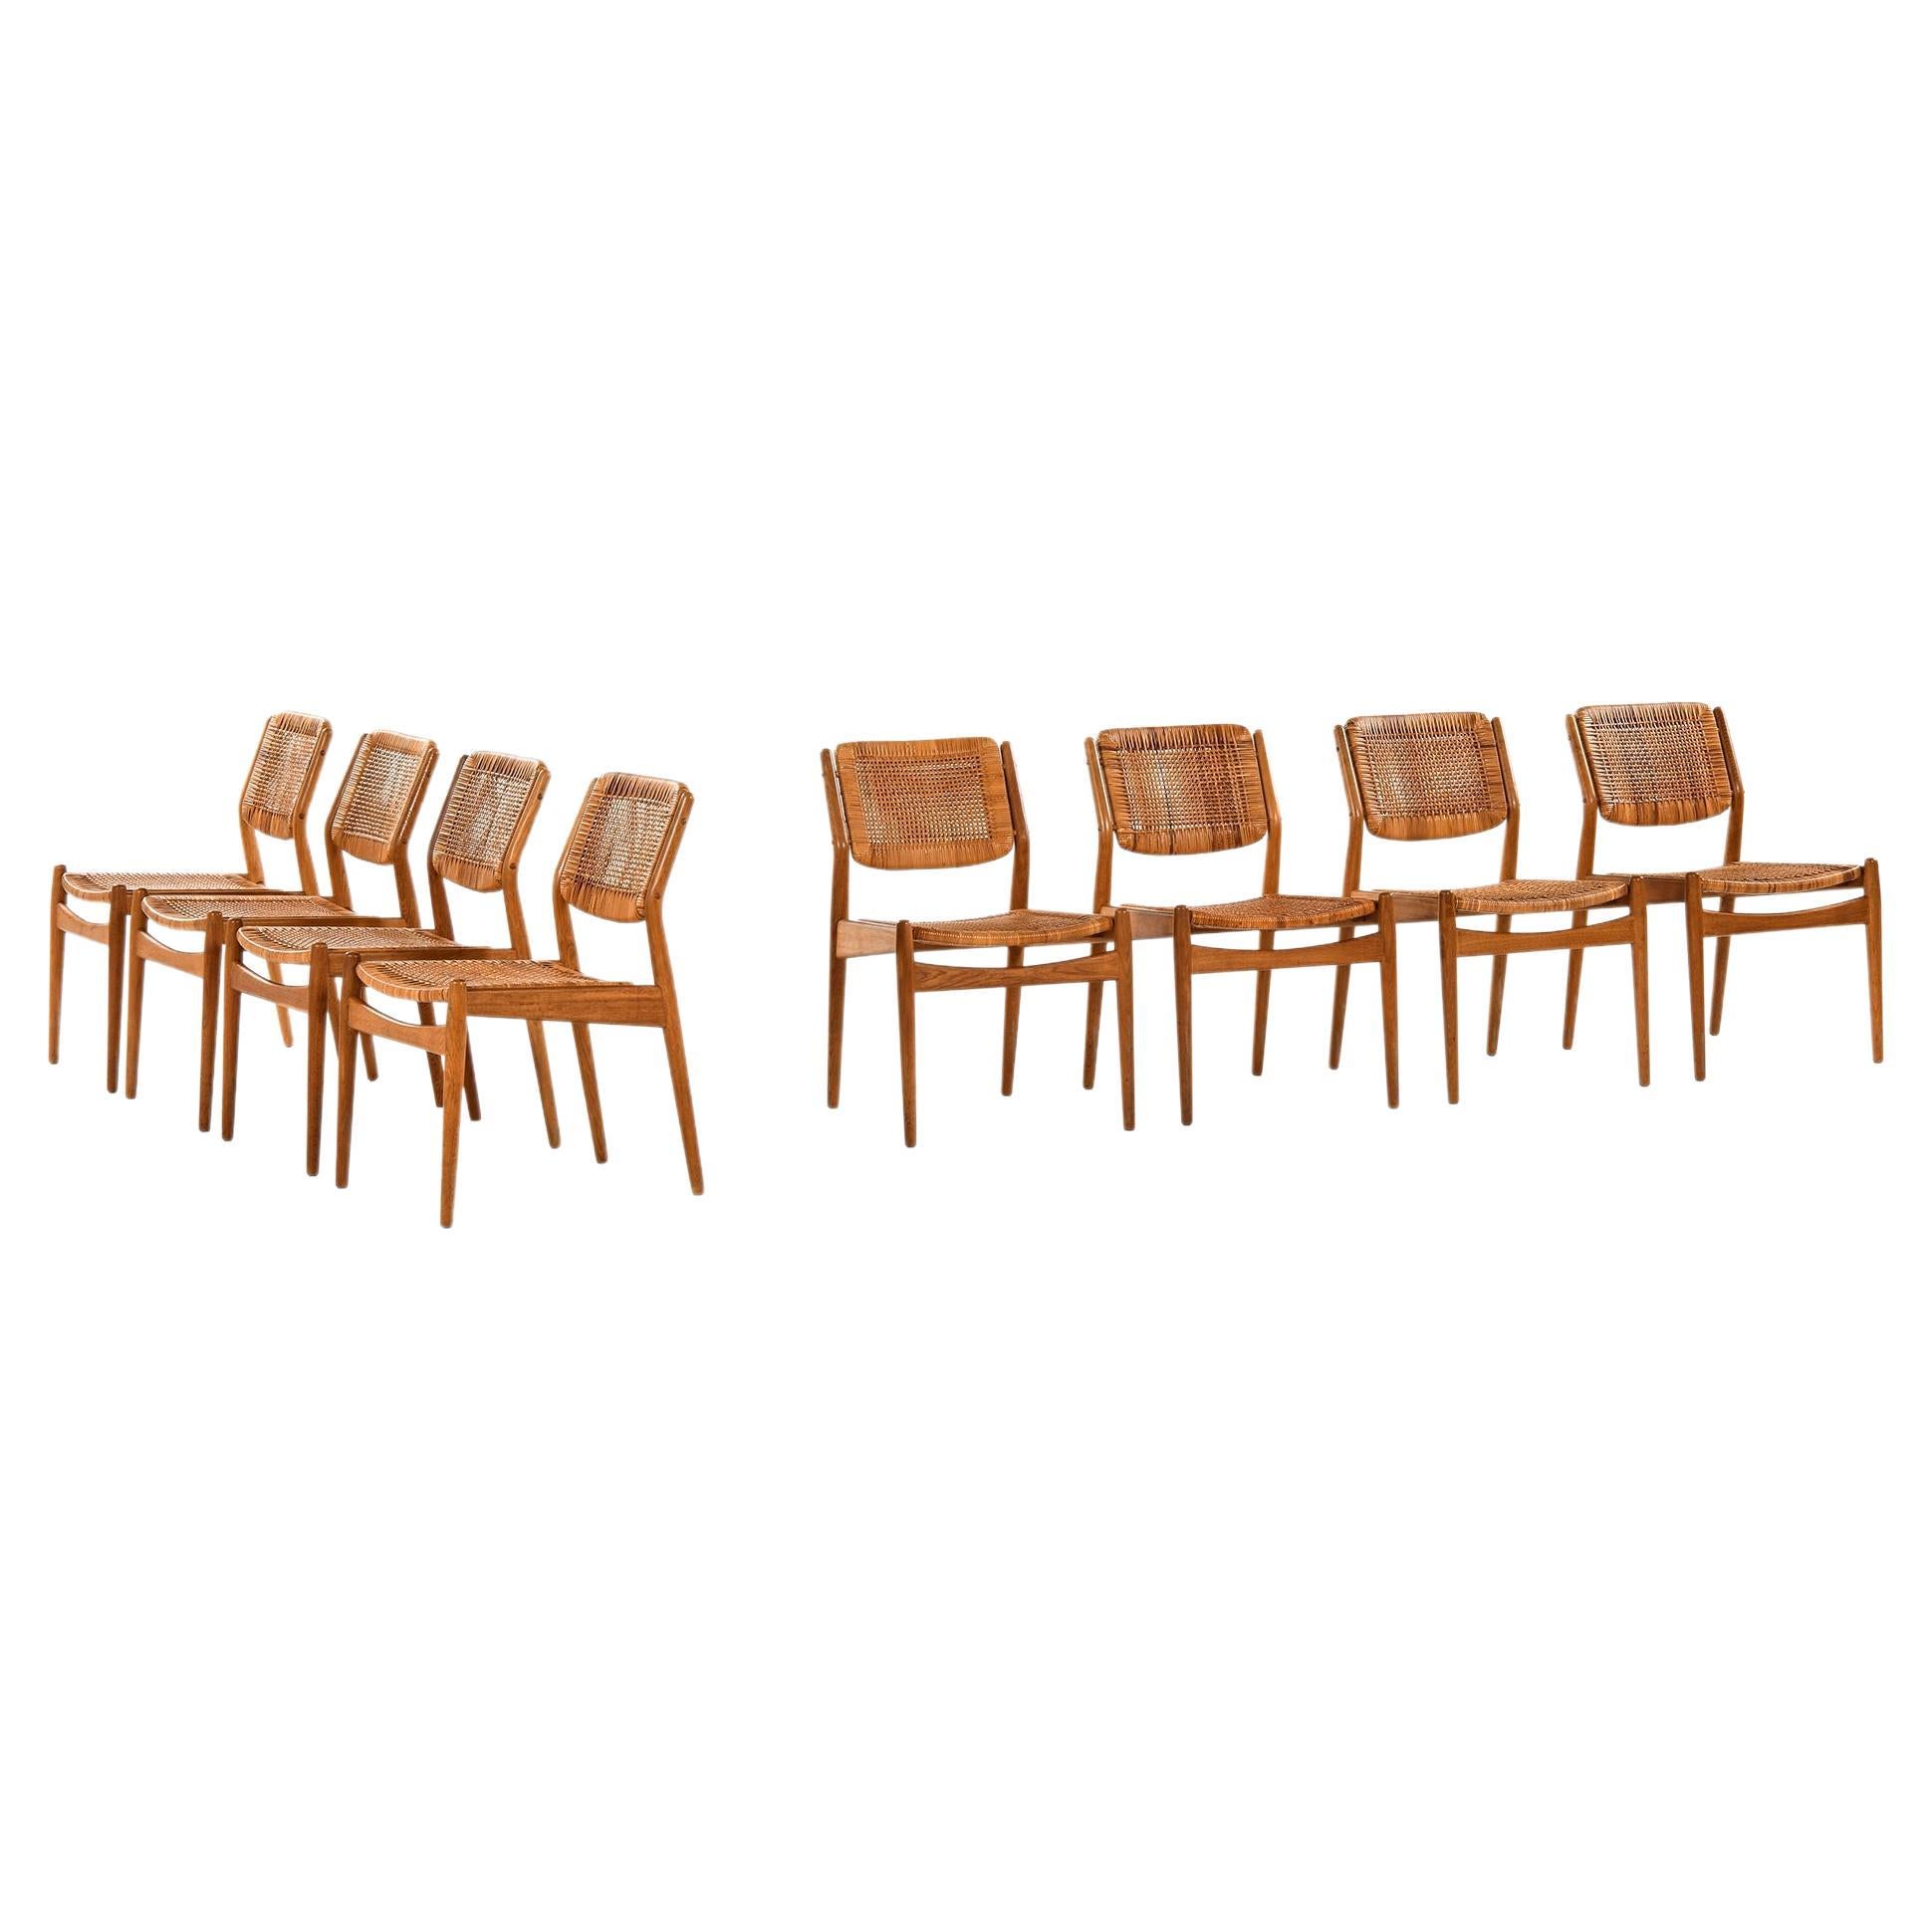 Set of 8 Dining Chairs in Oak and Woven Cane by Arne Vodder, 1951